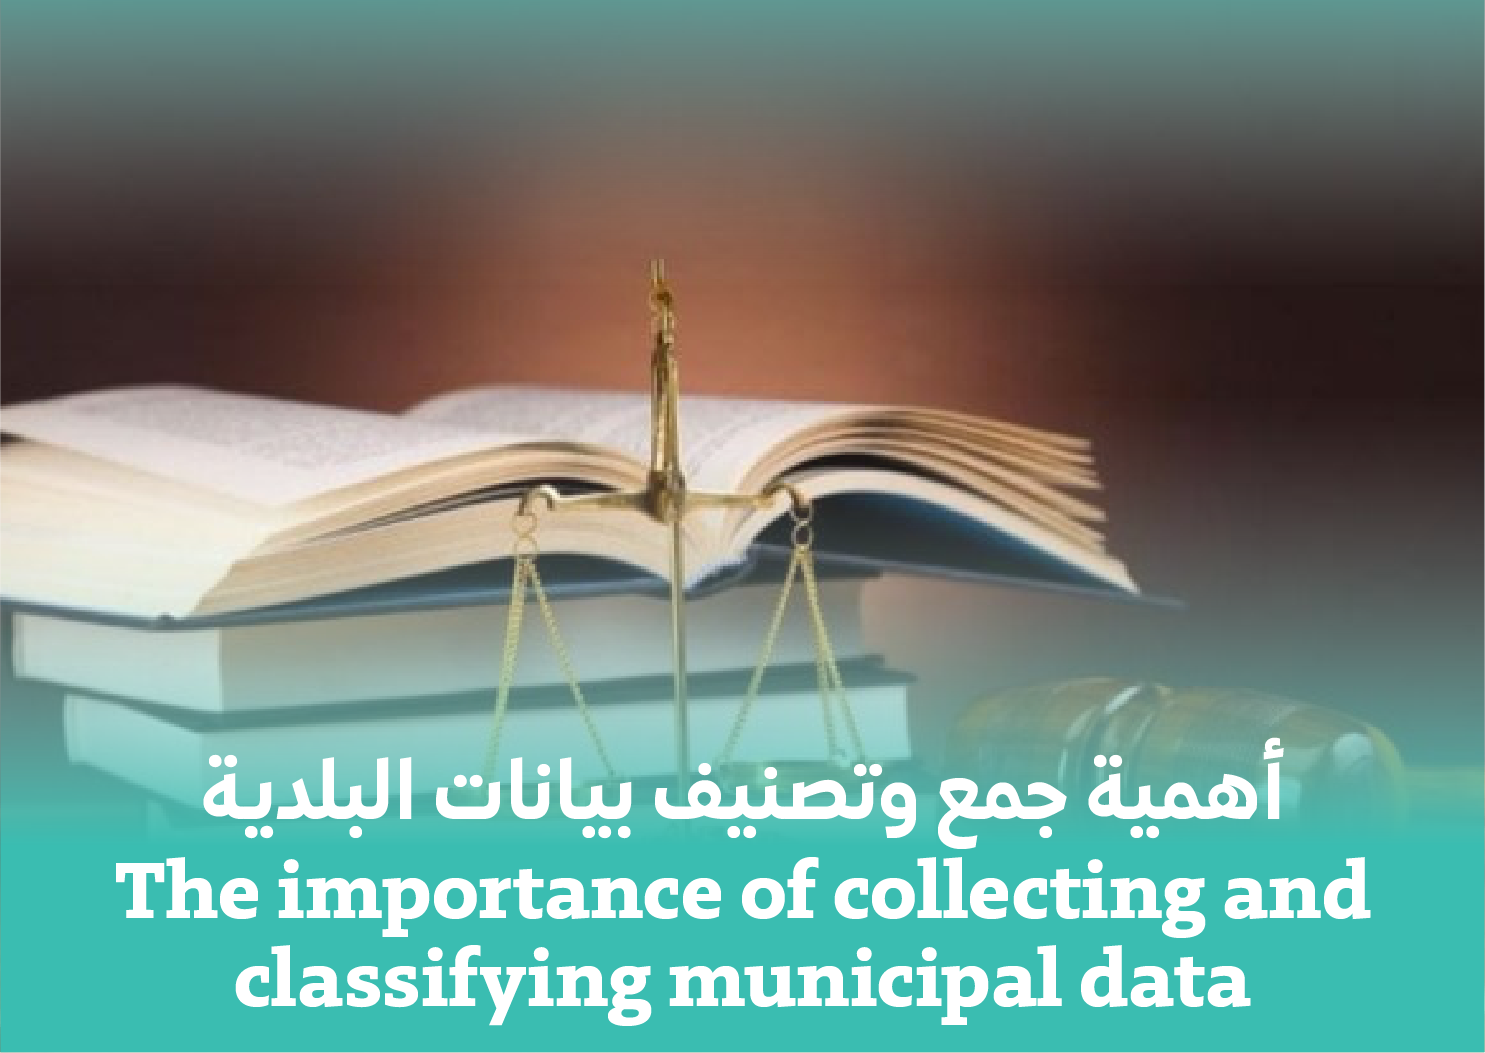 The importance of collecting and classifying municipal data